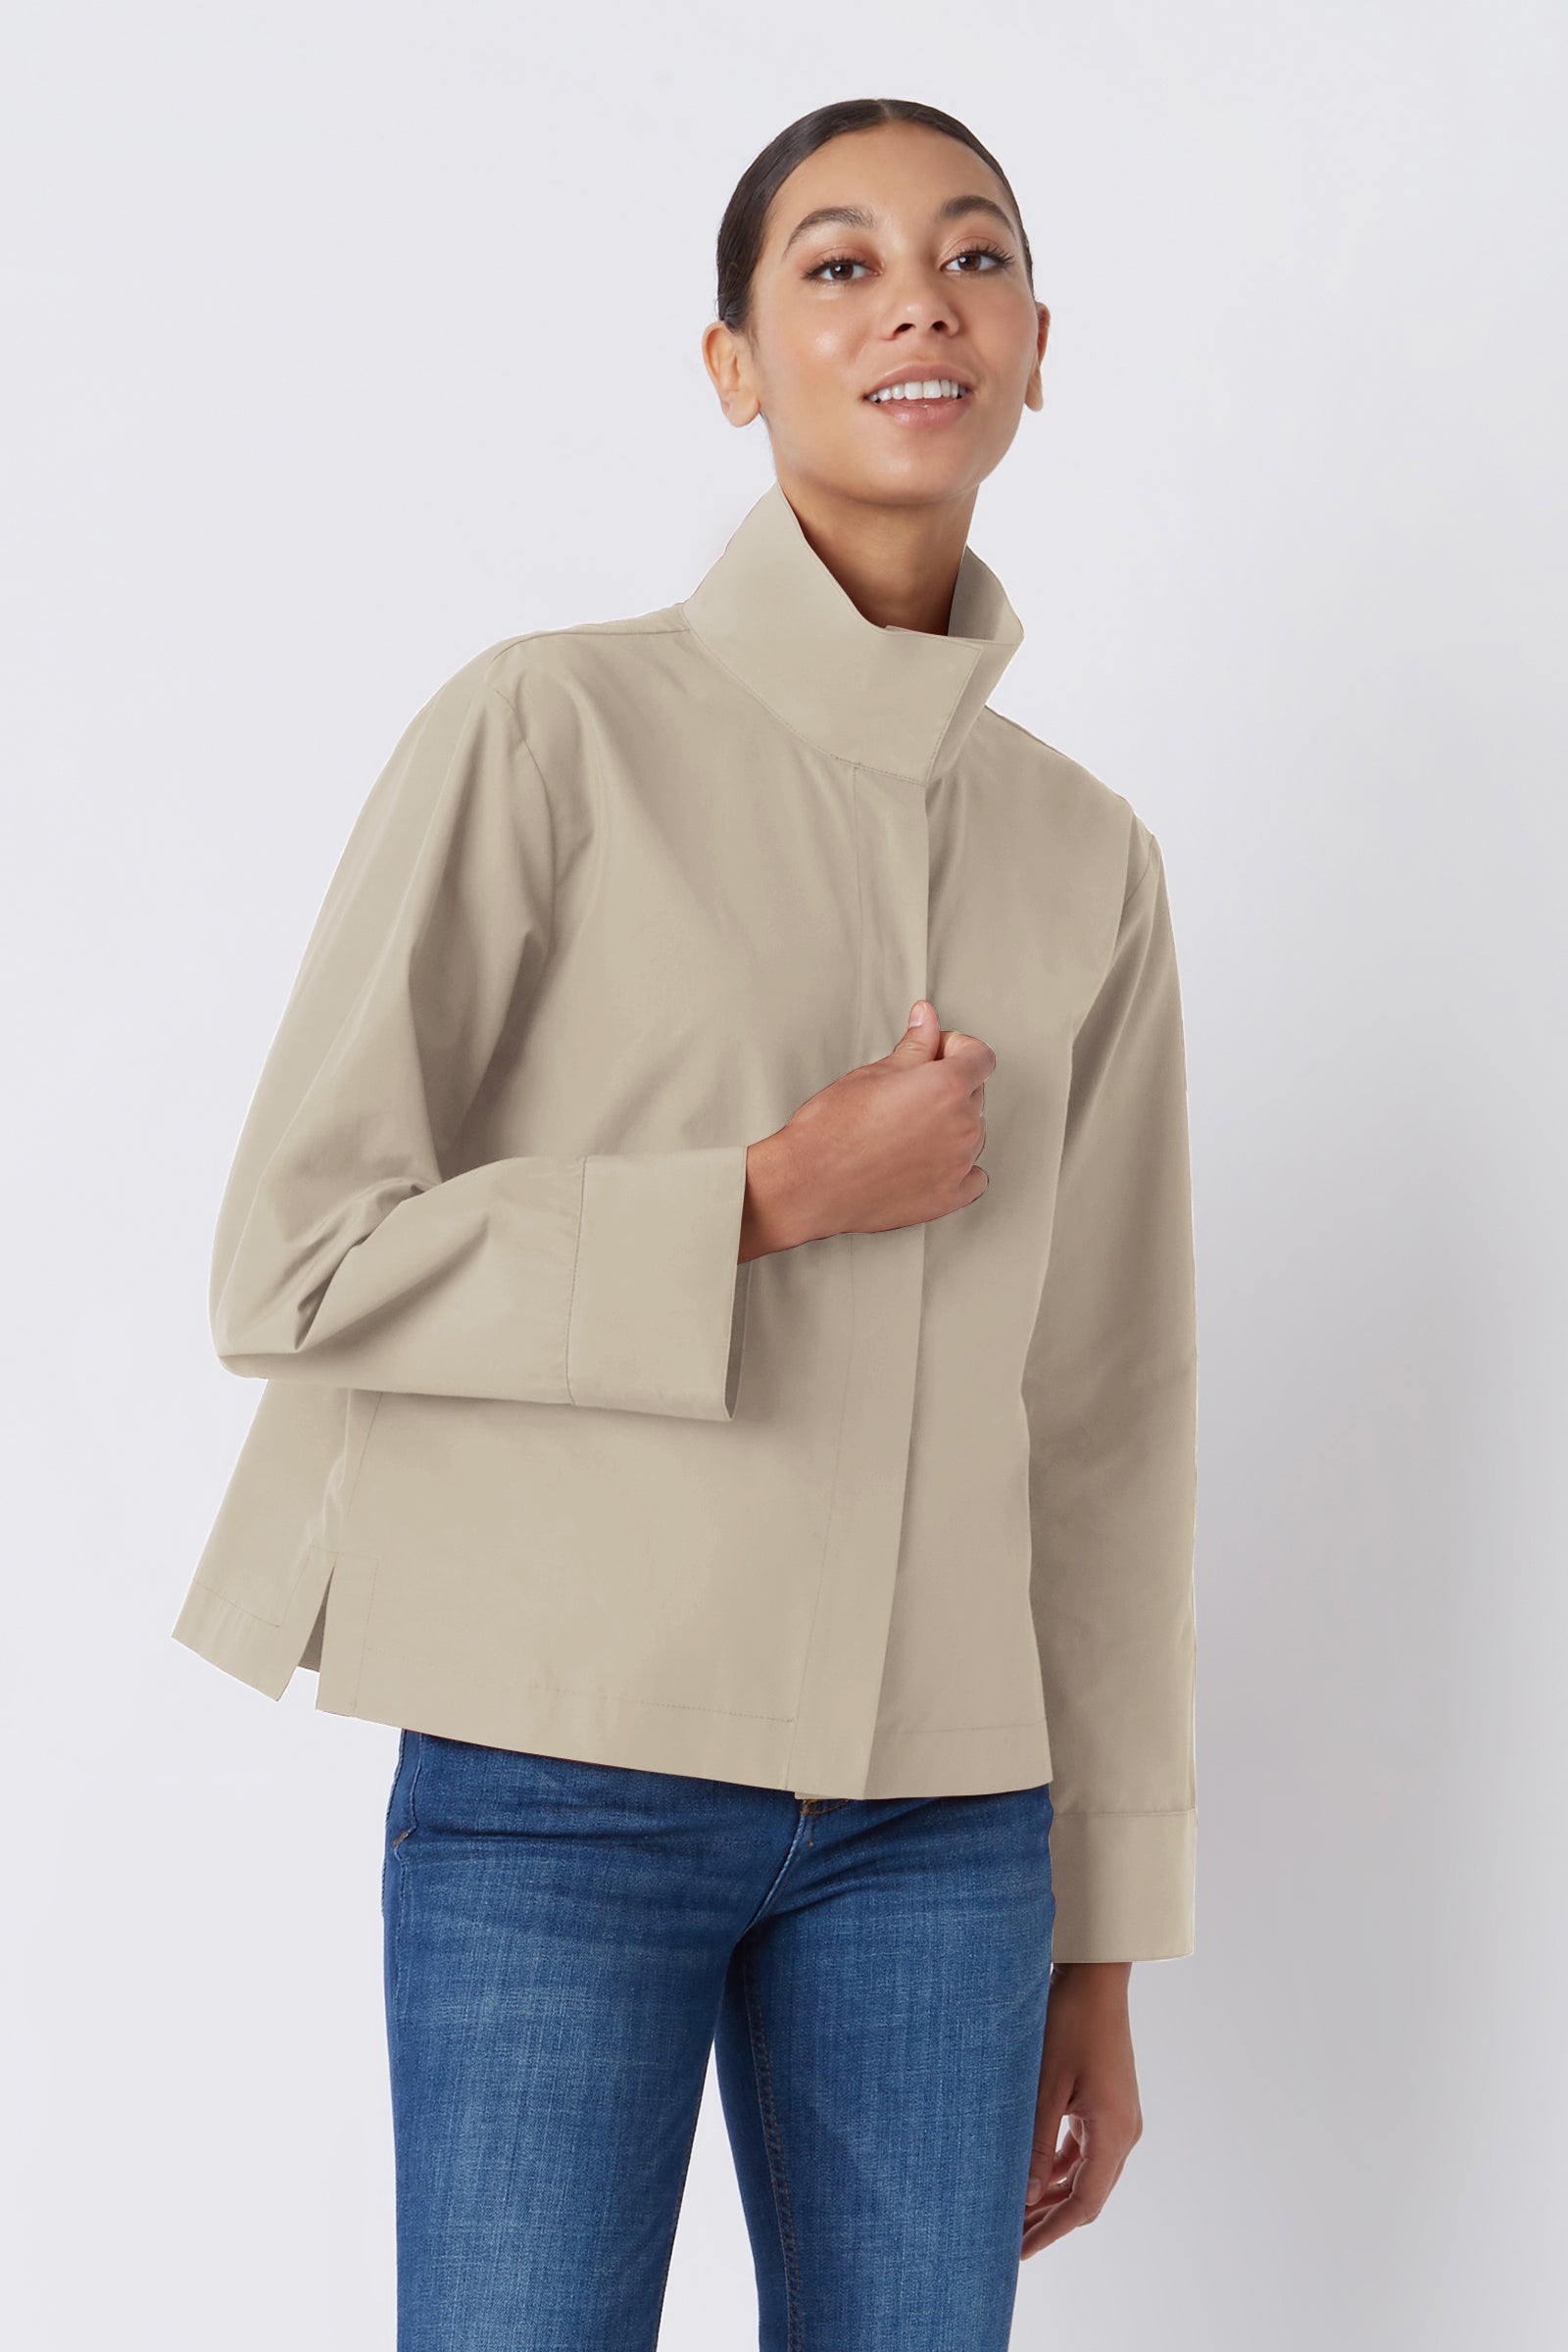 Kal Rieman Peggy Collared Shirt in Classic Khaki Broadcloth on Model Smiling Cropped Front View